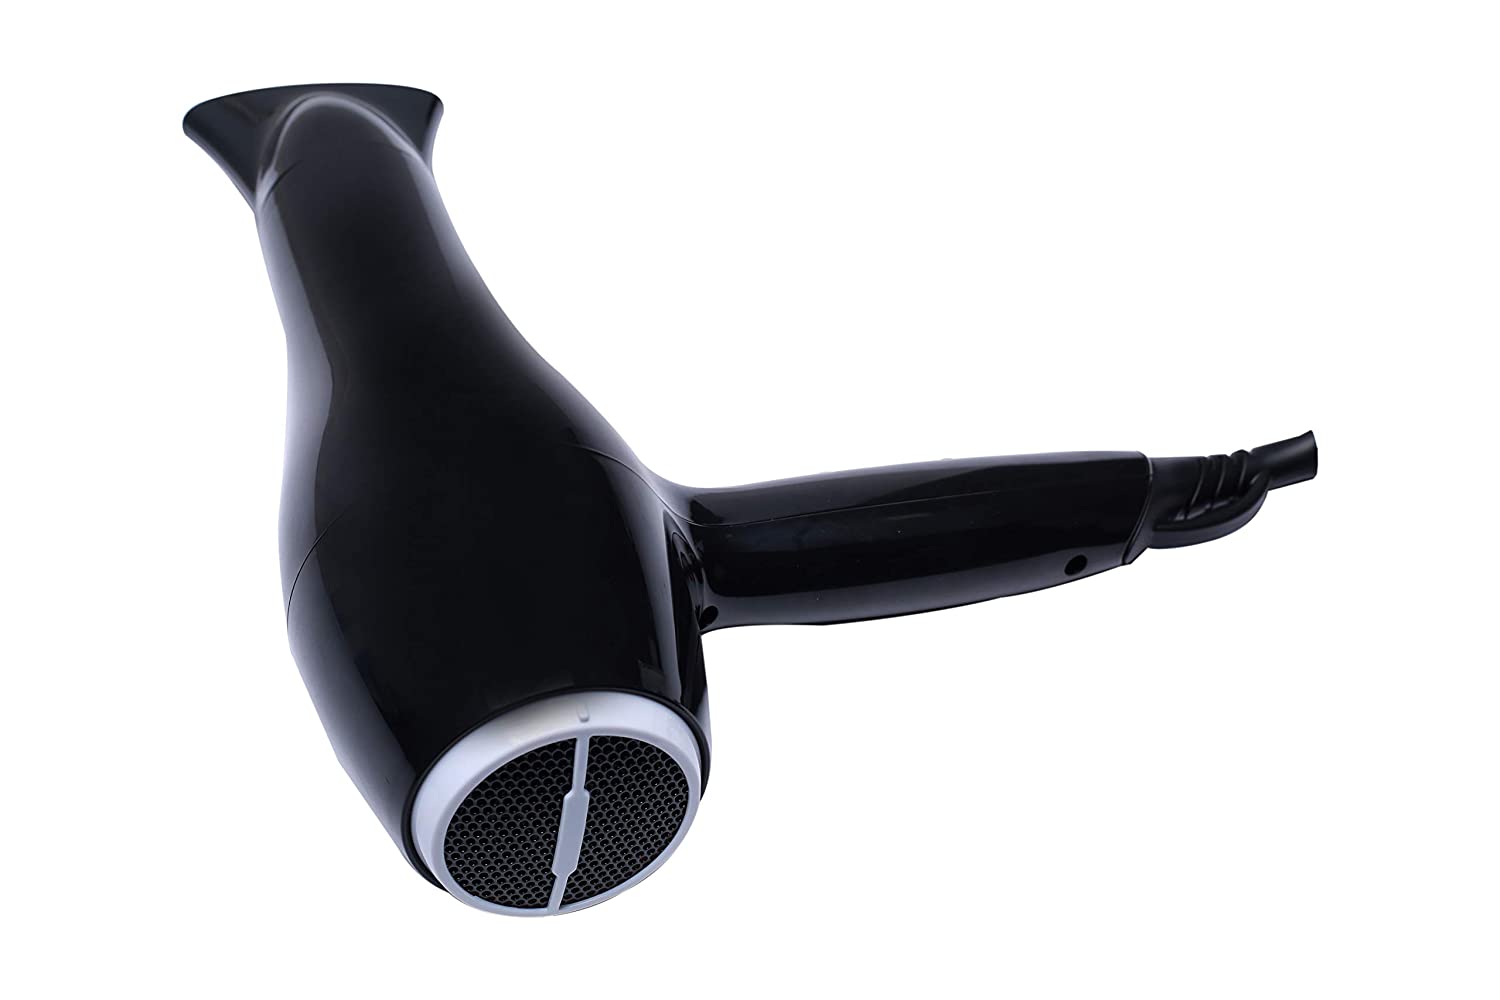 Sanford 1800 W Hair Dryer | Color Black | Best Personal Care Accessories in Bahrain | Hair Care and Styling | Halabh